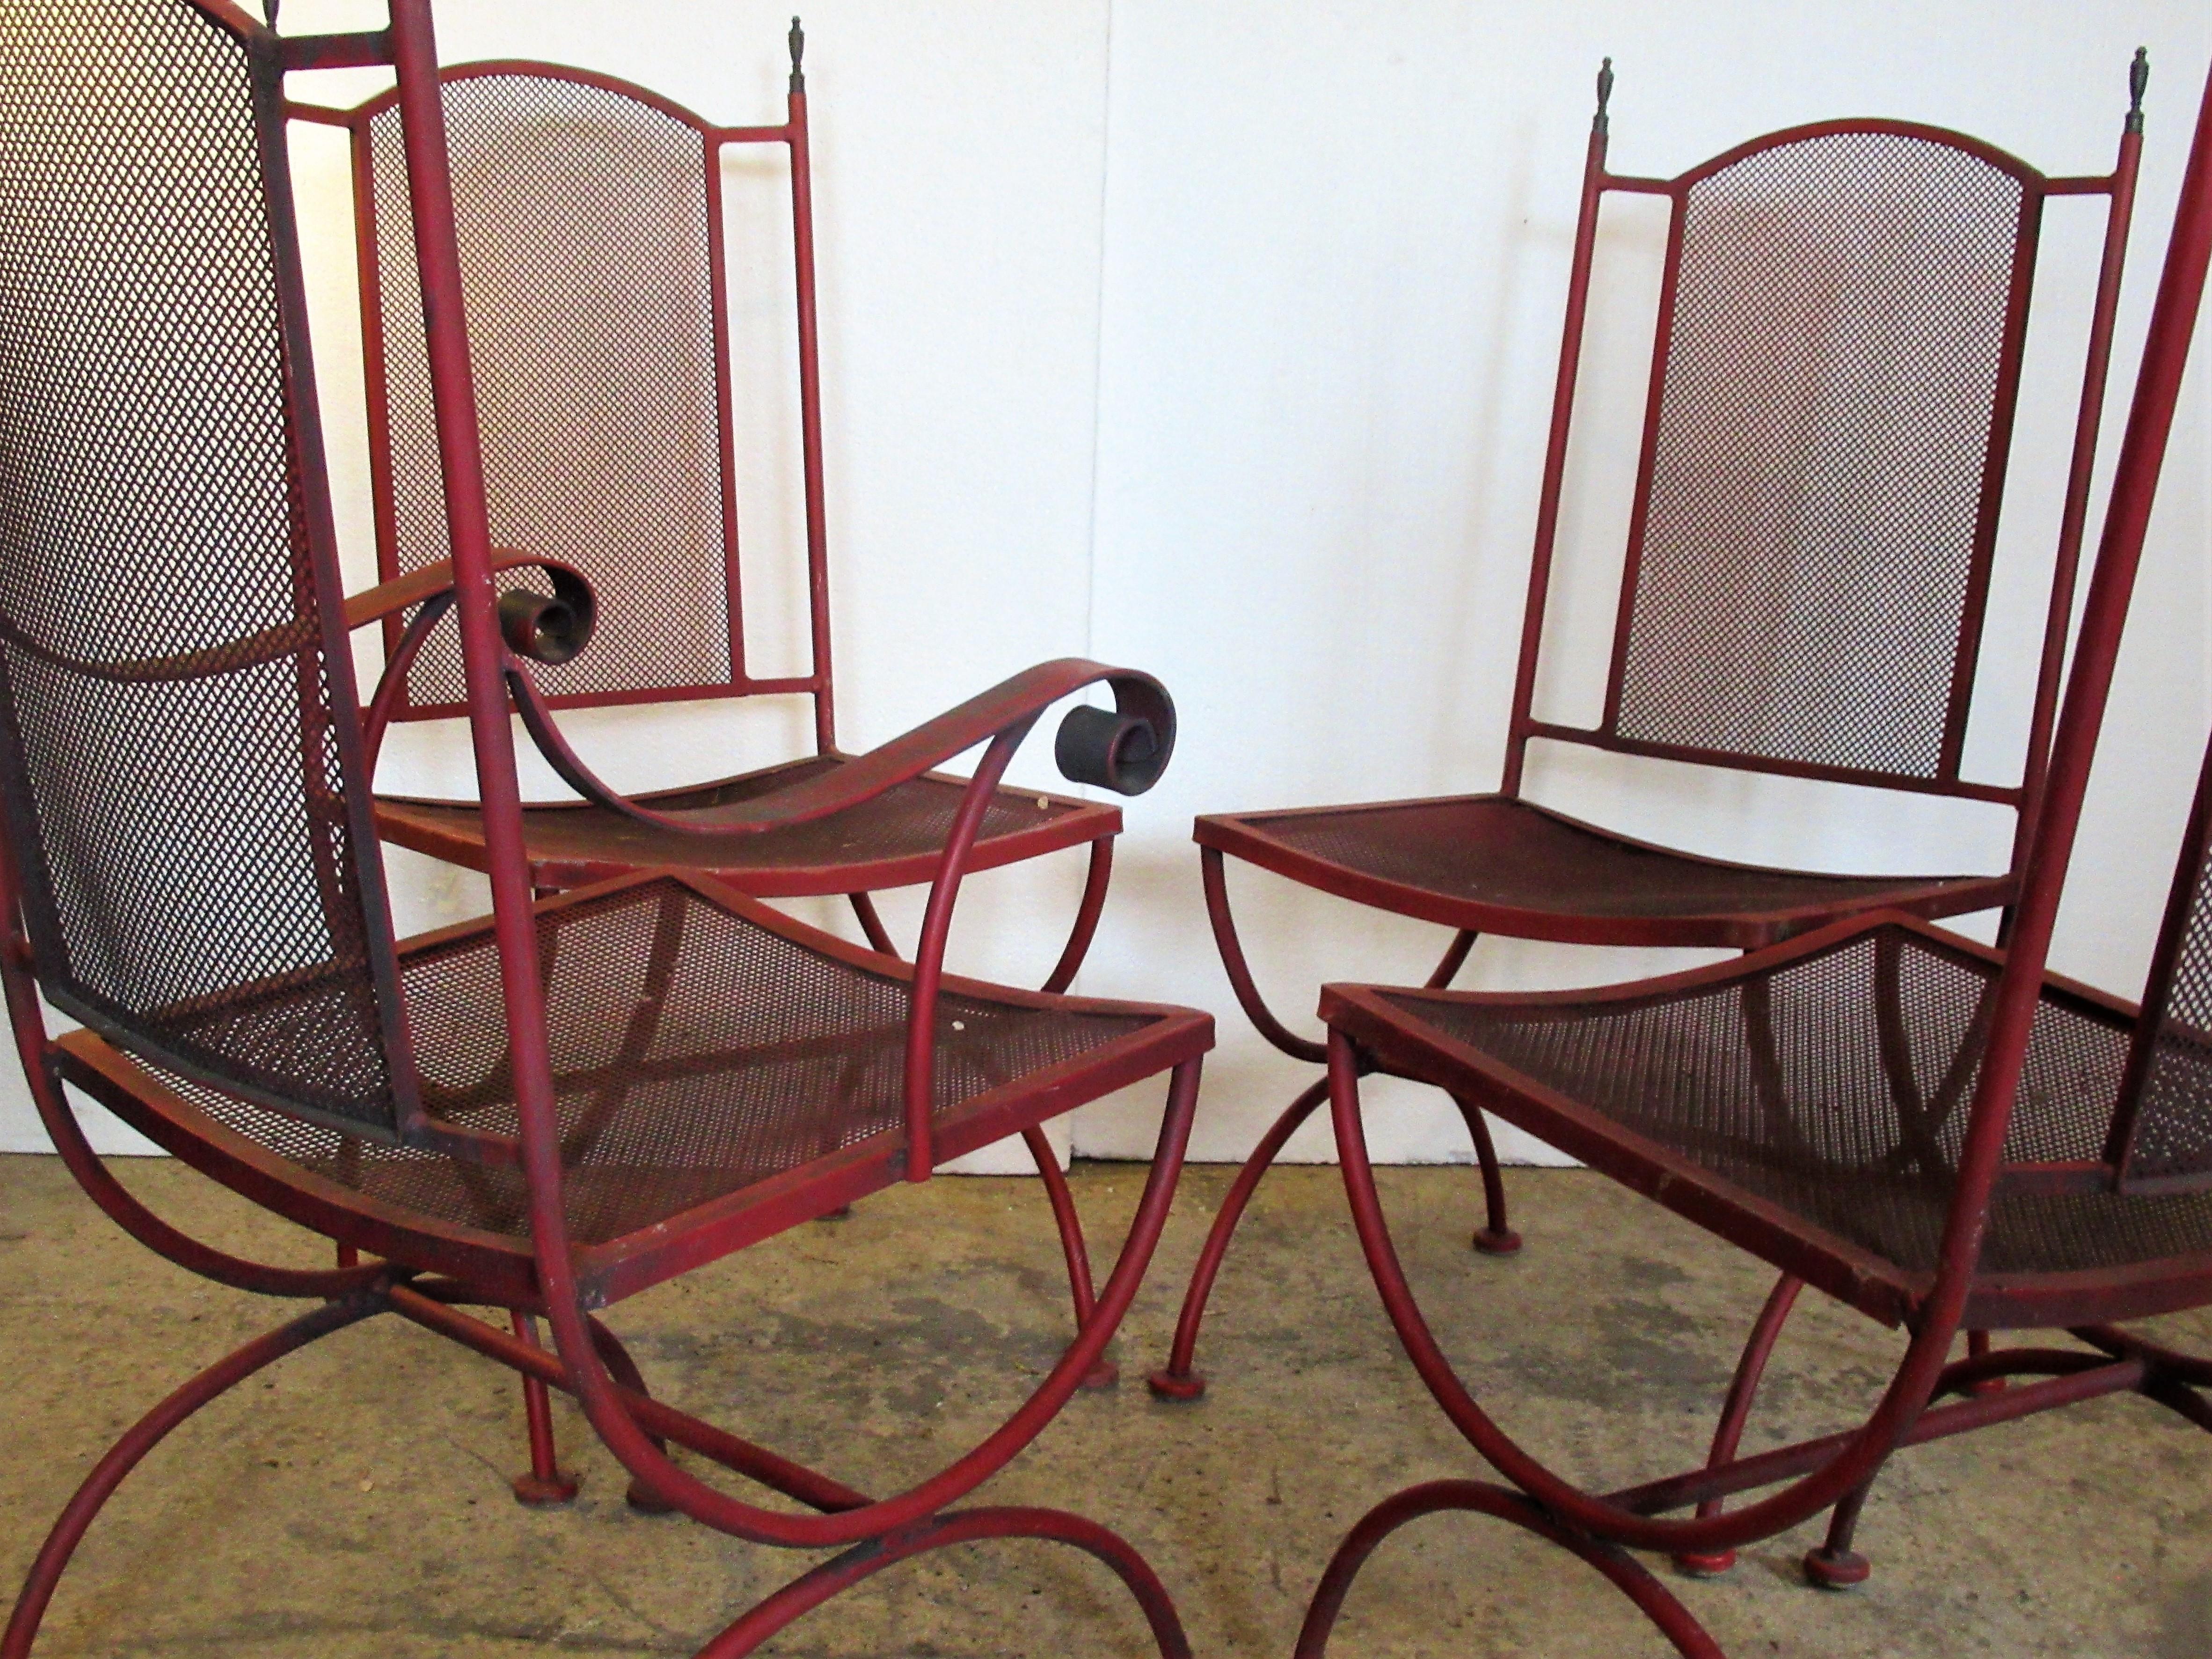 Wrought Iron and Brass Curule Chairs, 1960's For Sale 9